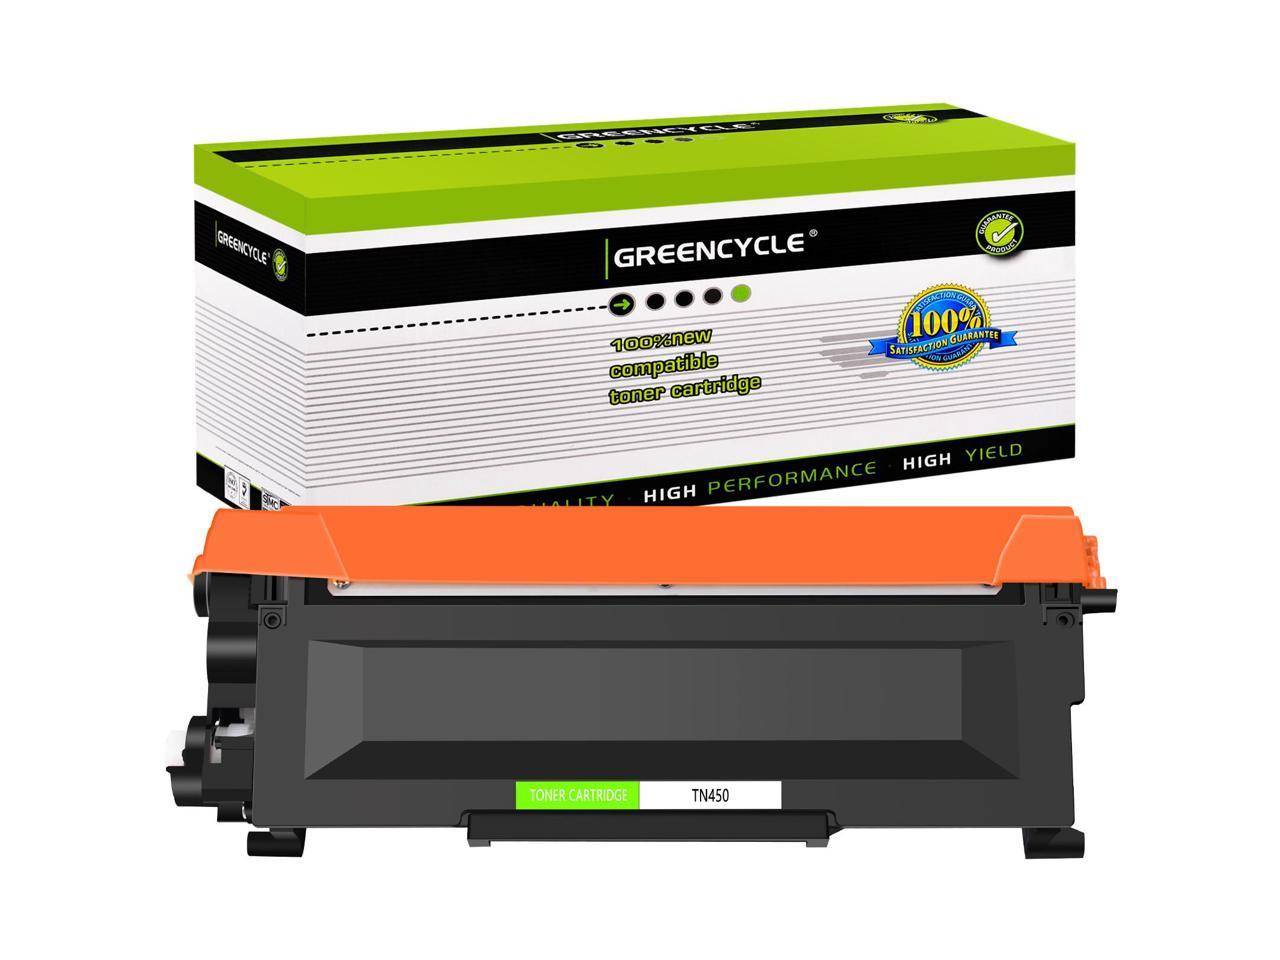 GREENCYCLE Compatible Toner Cartridge for Brother TN450 TN-450 TN-420 for HL-2270DW HL-2280DW HL-2230 HL-2240 MFC-7360N MFC-7860DW DCP-7065DN Intellifax 2940 (1 Pack Black) -